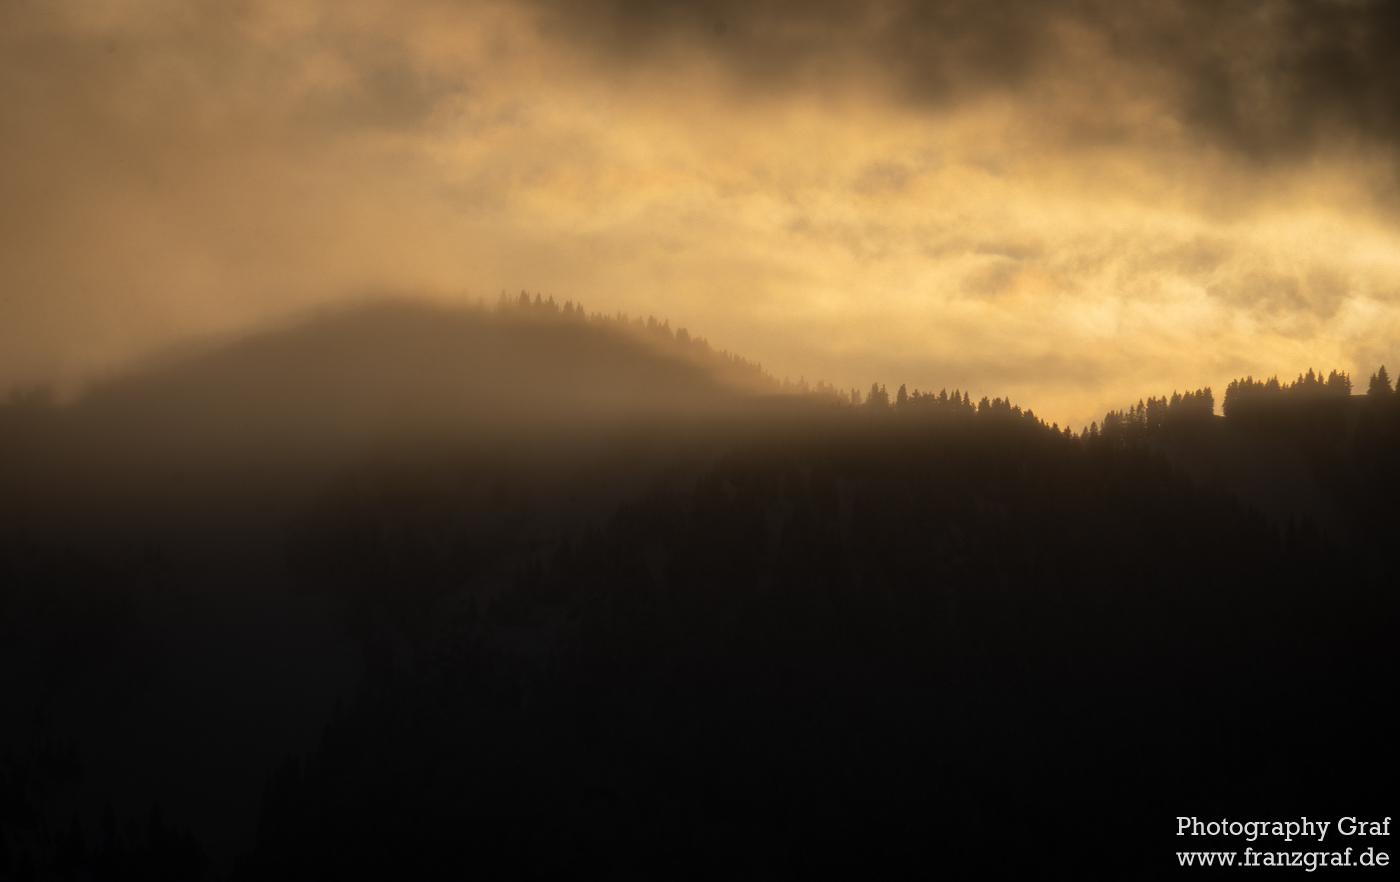 The image is a mesmerizing blend of nature's tranquility and drama. Mist shrouds forested mountains, while a golden sky suggests the quiet glow of dawn or dusk. The mountains' silhouettes peek through the mist, adding a sense of depth and mystery. Clouds weave dynamically through the scene, enhancing the landscape's ethereal quality. The photograph captures the dual essence of beauty and enigma in the natural world, inviting contemplation and wonder. It's a snapshot that beautifully conveys the silent dance between light and shadow, and the enduring allure of the wilderness. The watermark indicates the artist's skill in encapsulating such a powerful display of nature's contrasts.